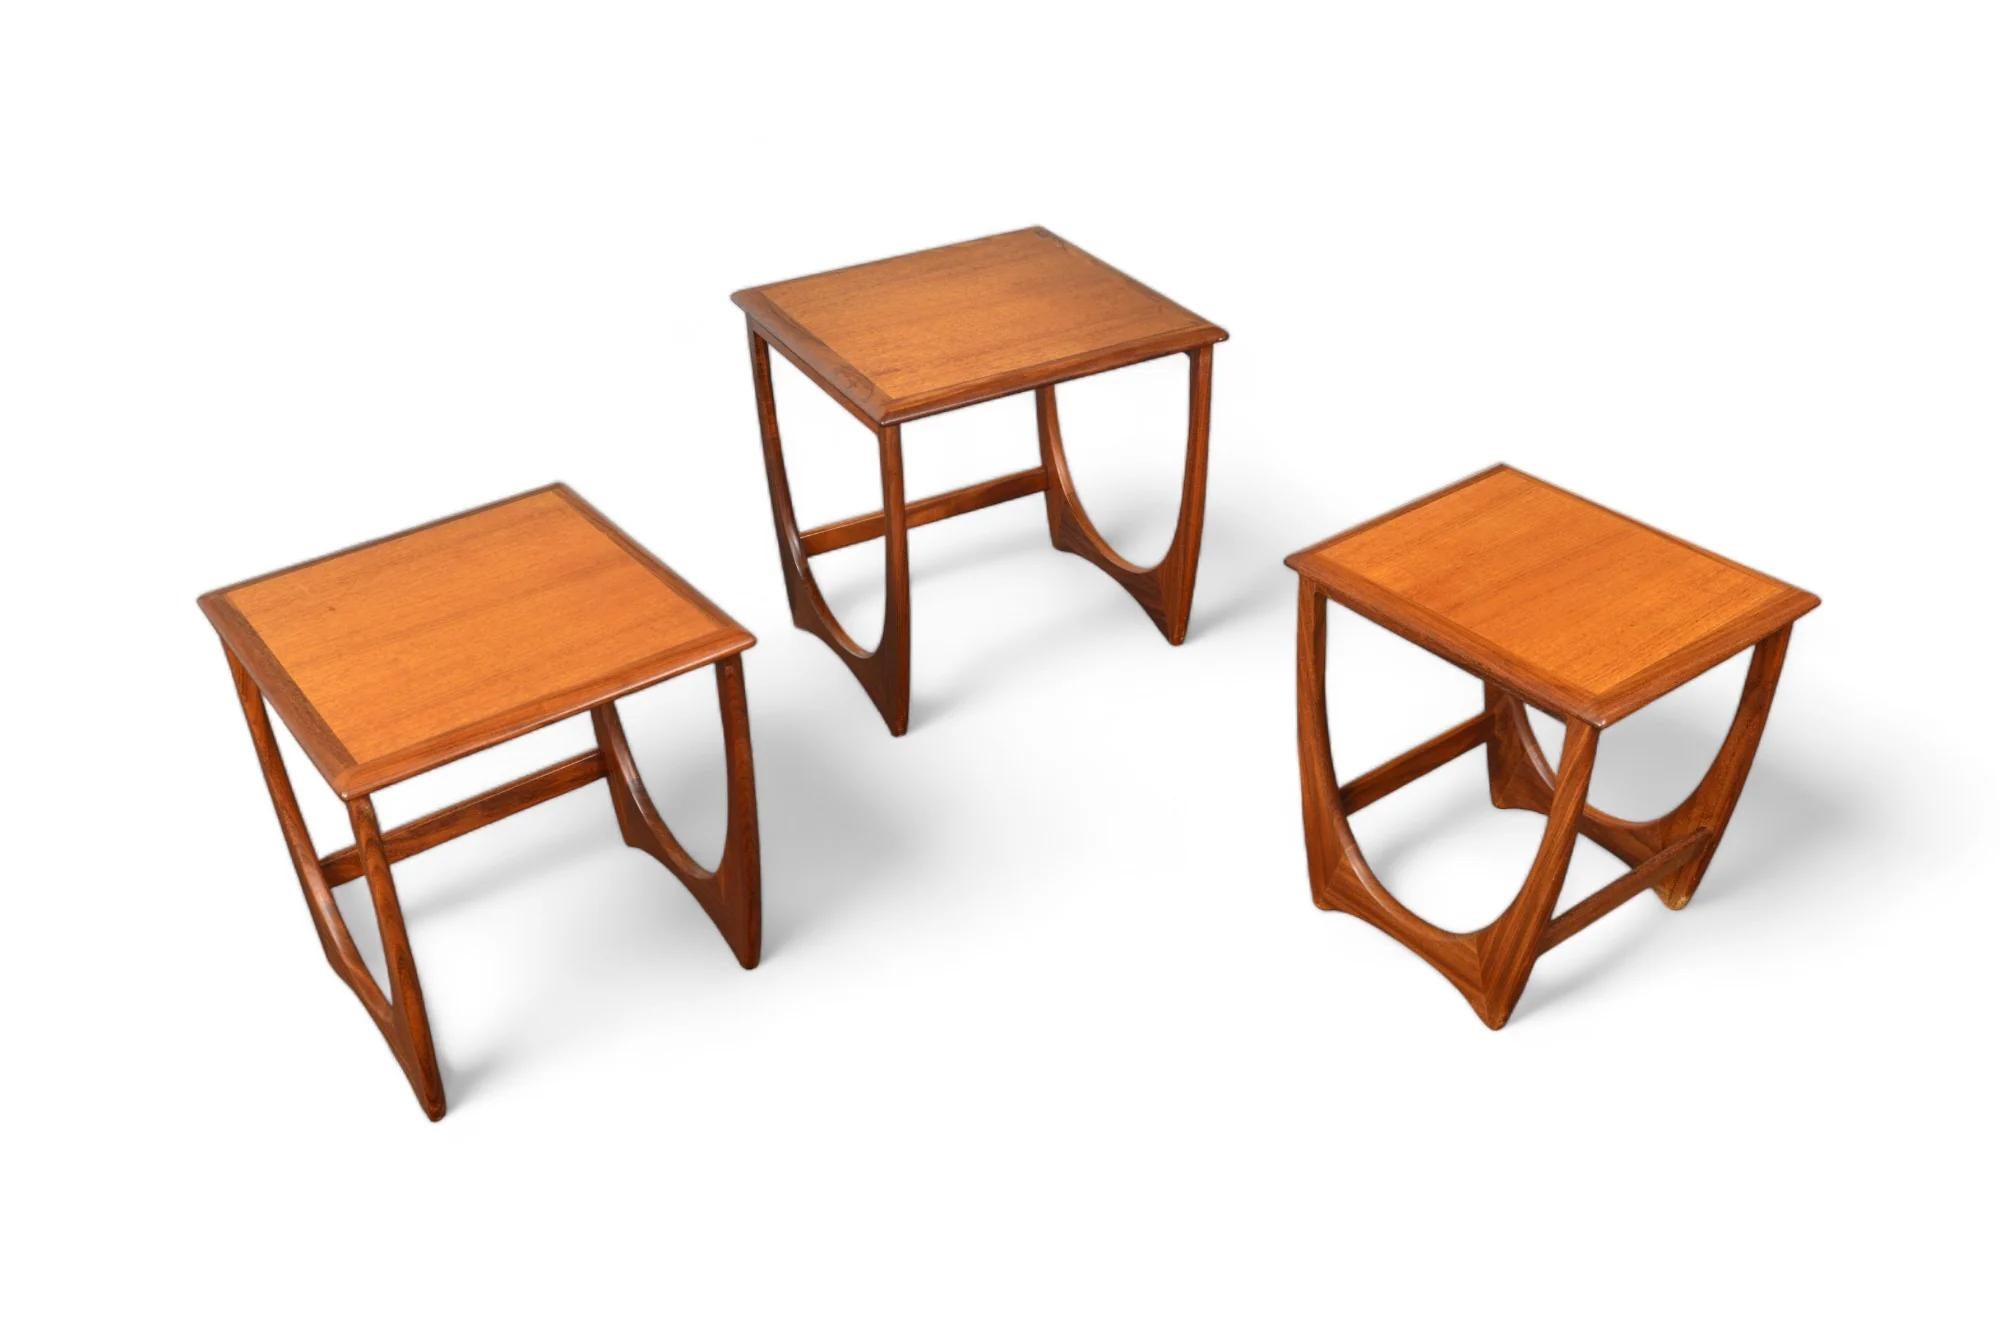 English Set Of G Plan Astro Nesting Tables In Teak #2 For Sale